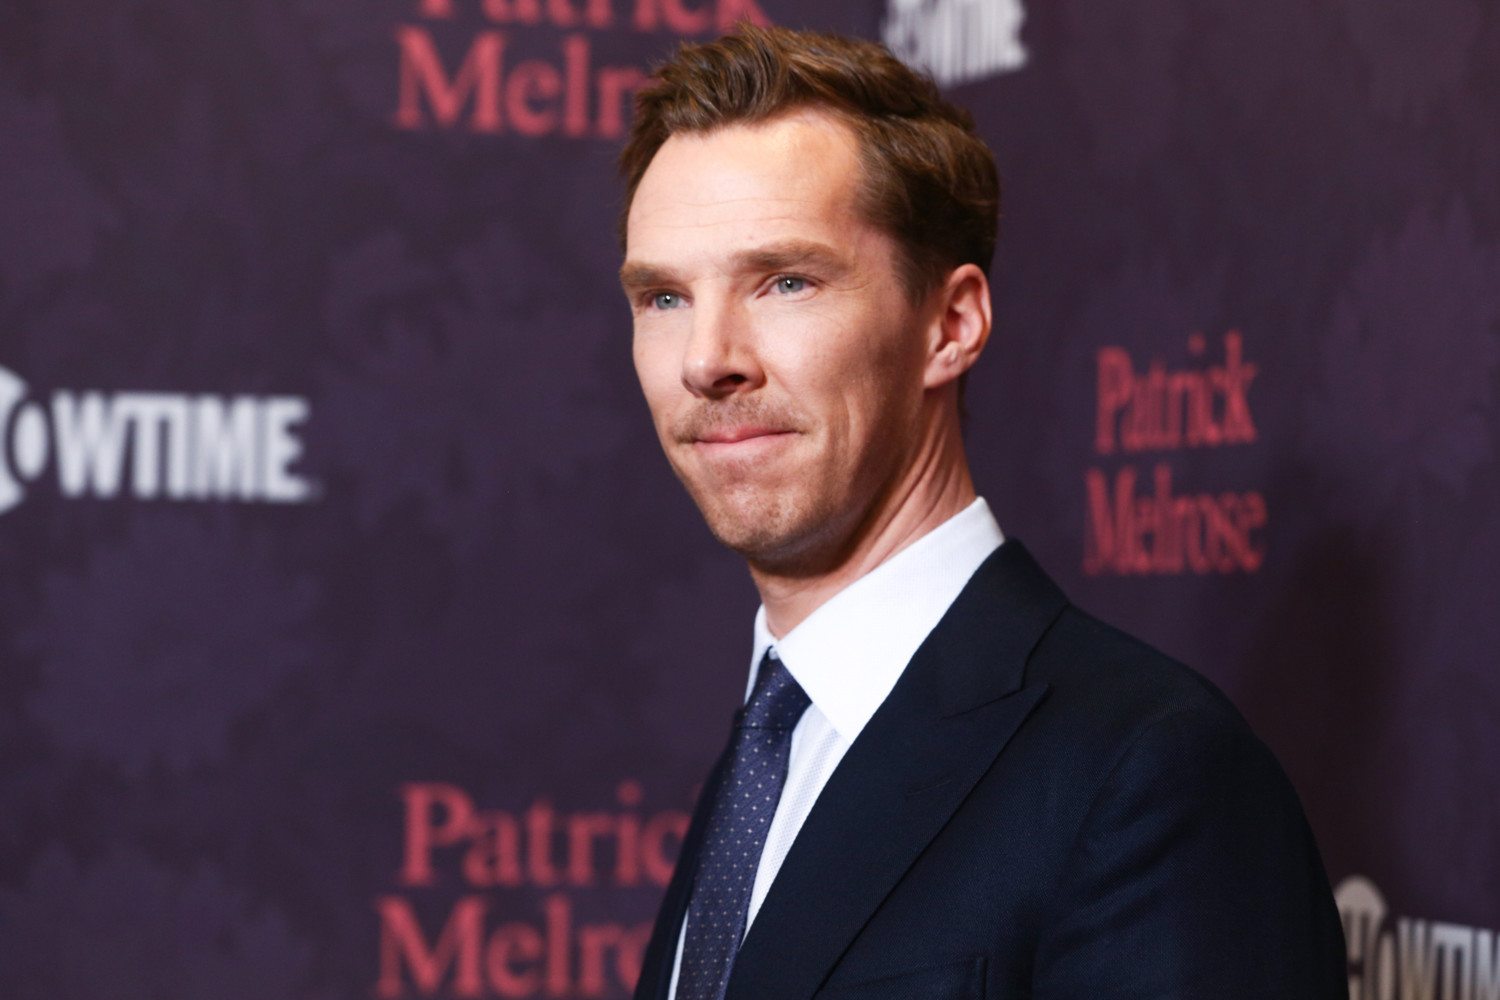 Premiere Of Showtime's 'Patrick Melrose' - Red Carpet